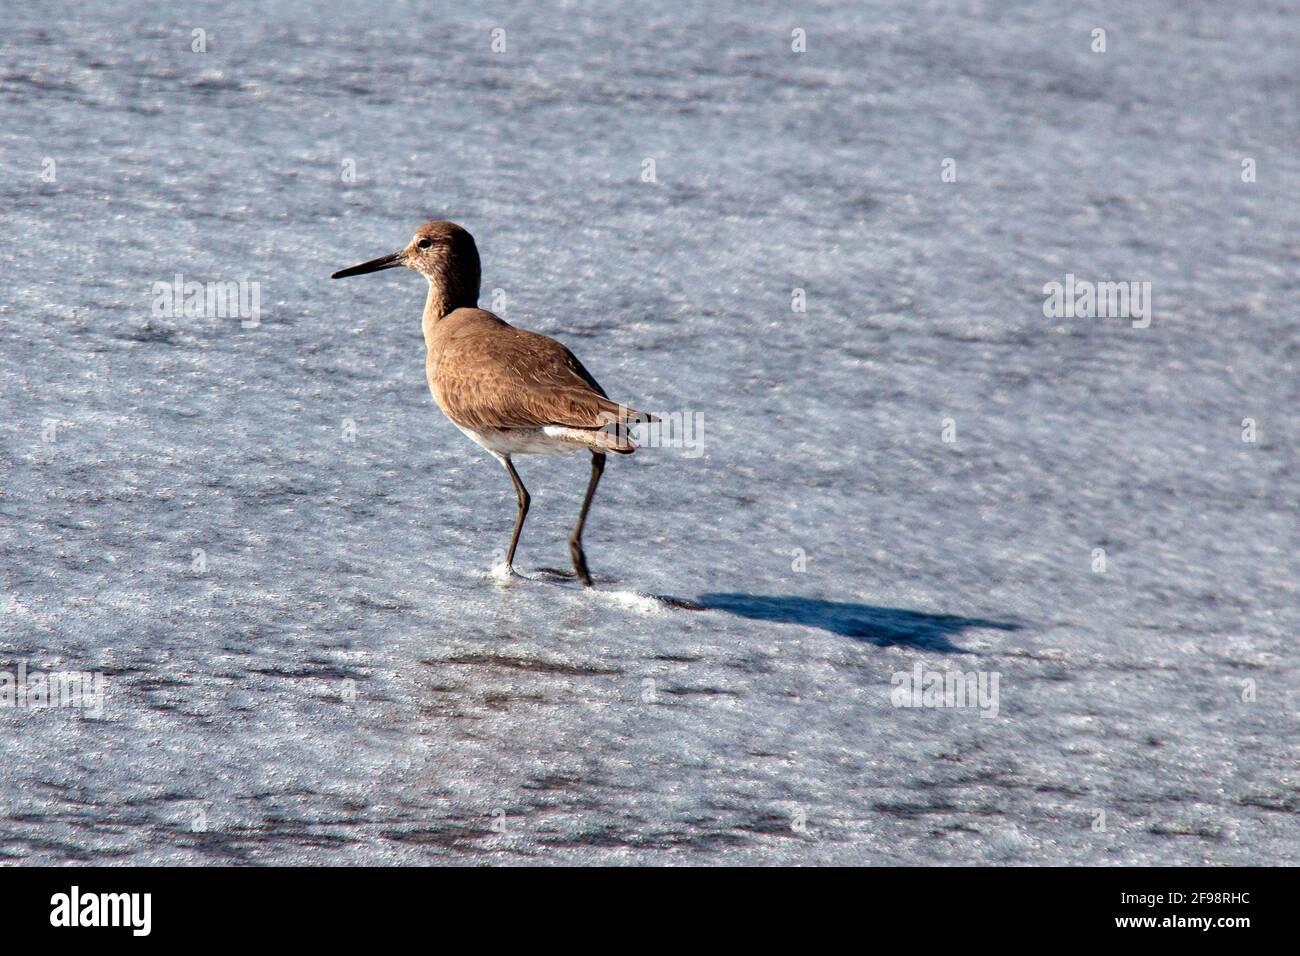 Whimbrel shorebird wading in the surf on Surfers Knoll beach in Ventura California United States Stock Photo